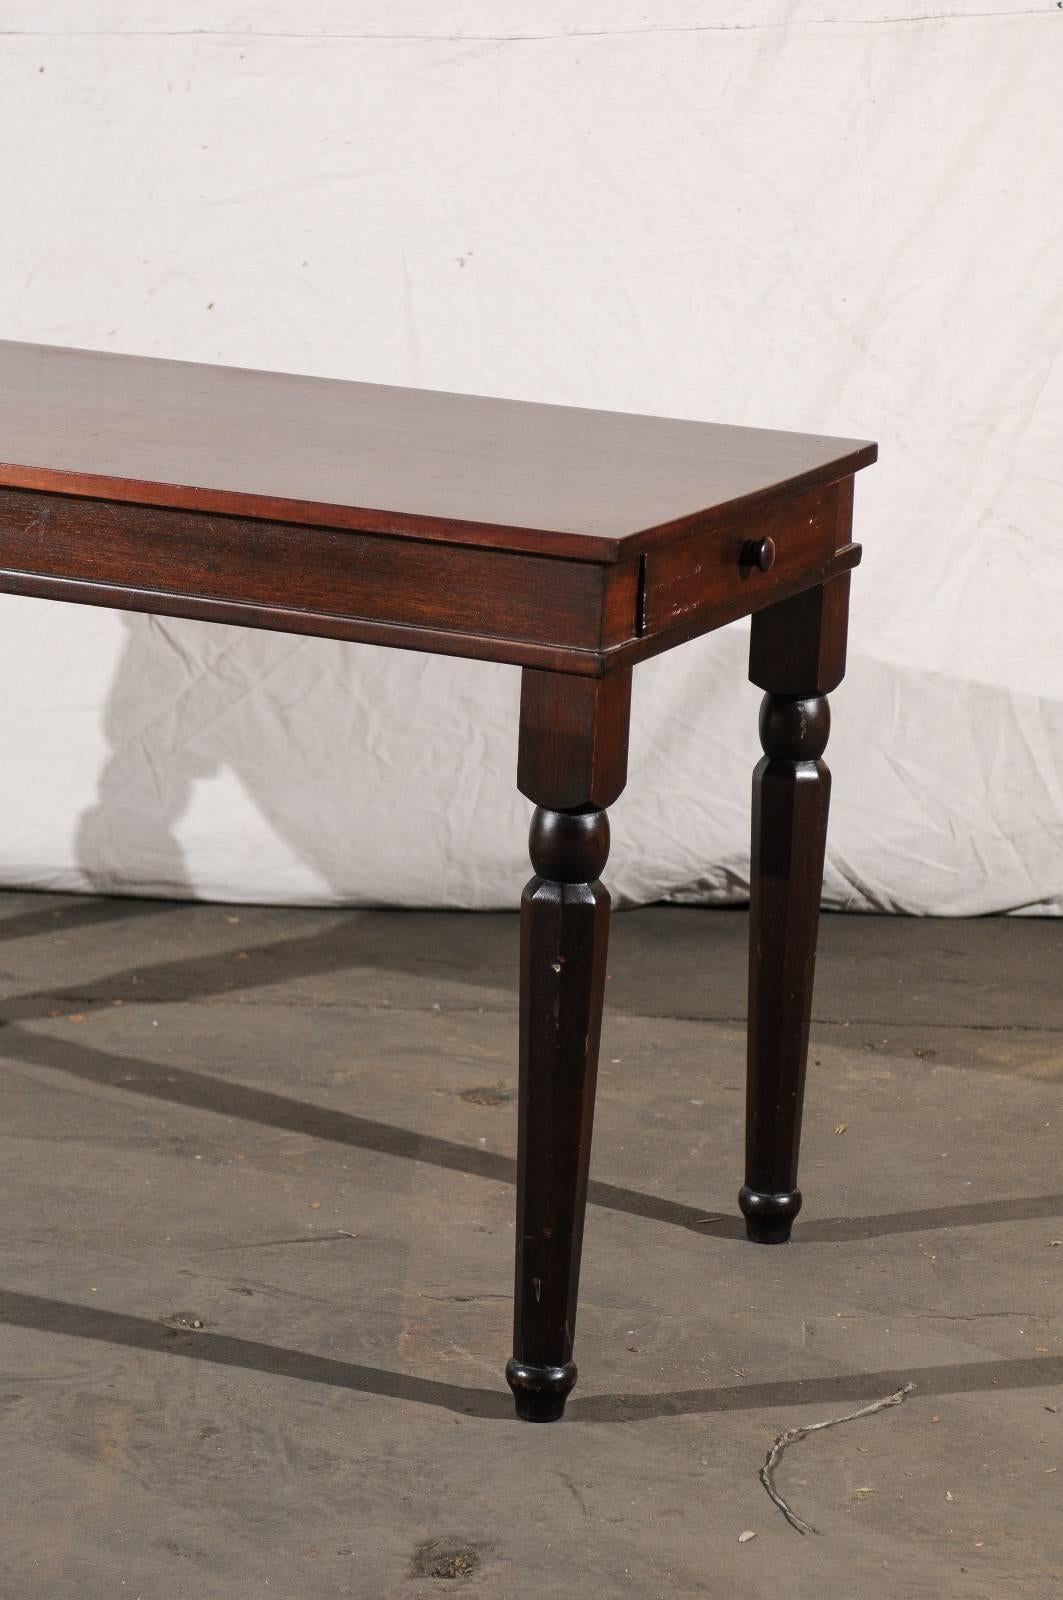 Charming 19th Century Long English Mahogany Table with Single Drawer In Good Condition For Sale In Atlanta, GA